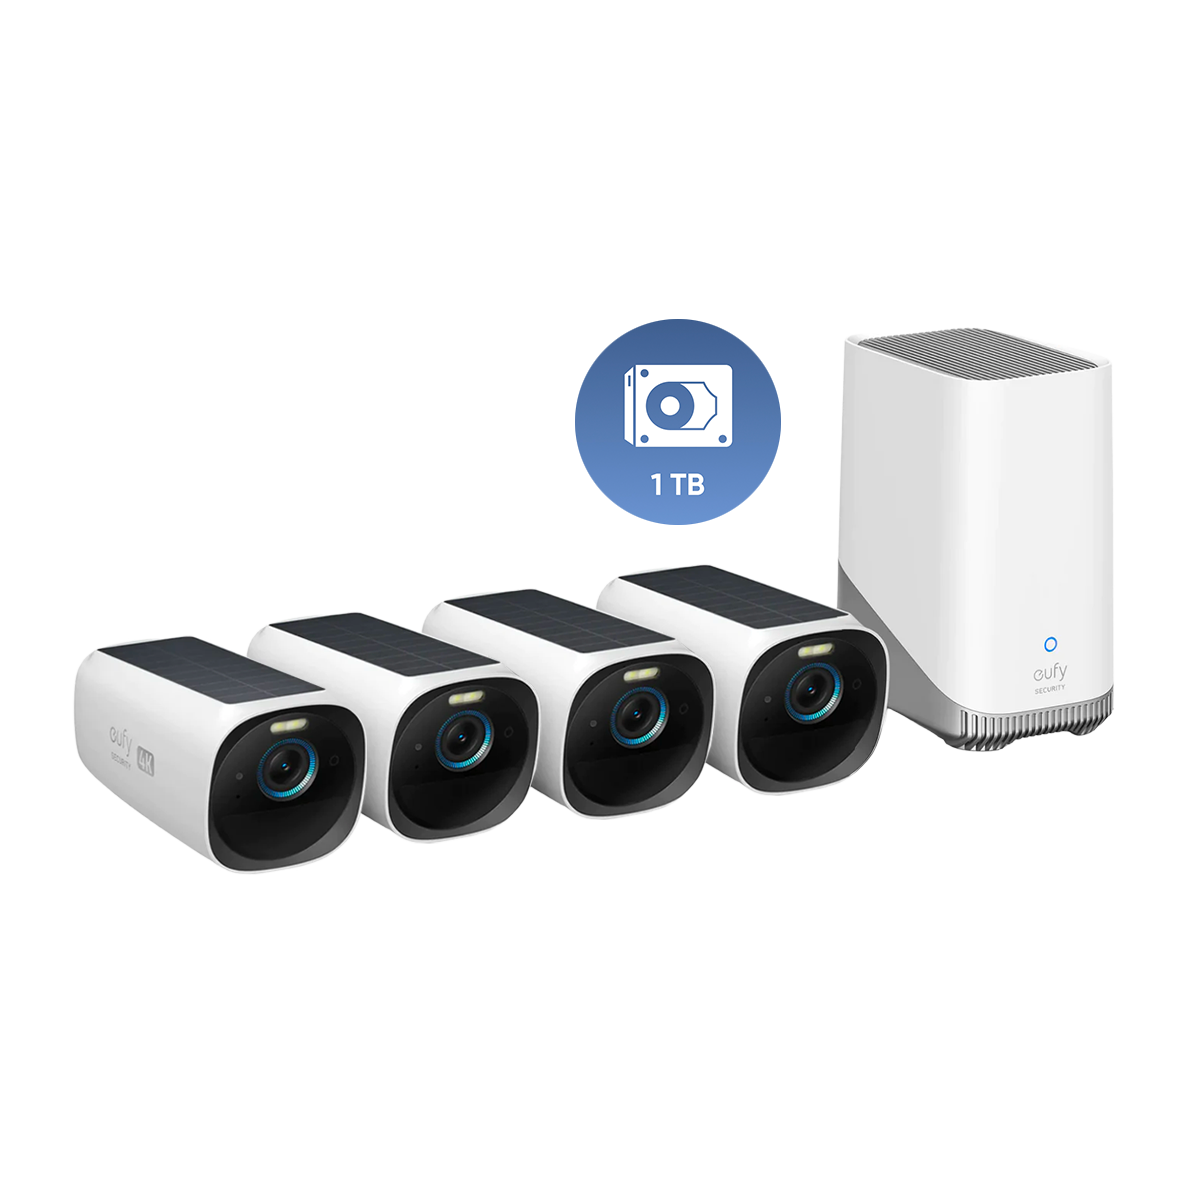 Eufy By Anker Innovations eufyCam - T88011D1 Security Camera Price